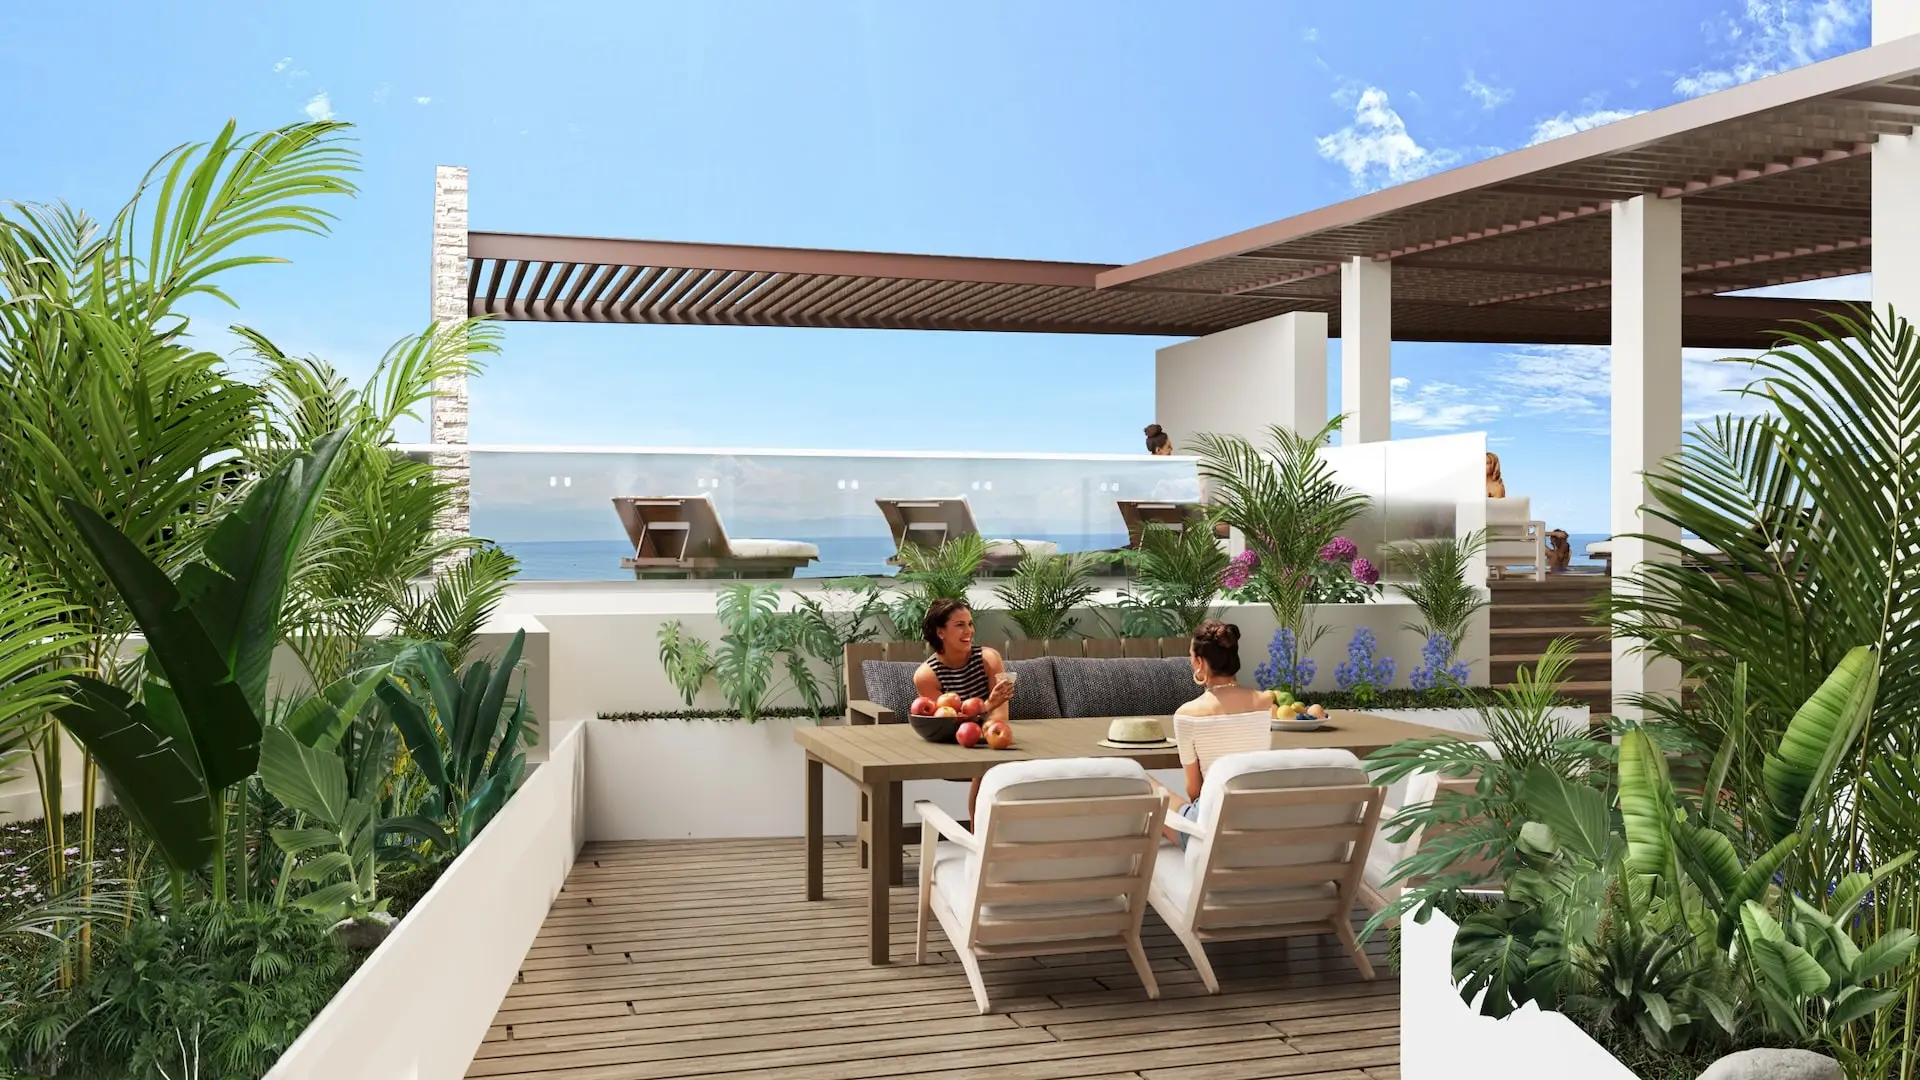 The One Residences - Terraza y alberca